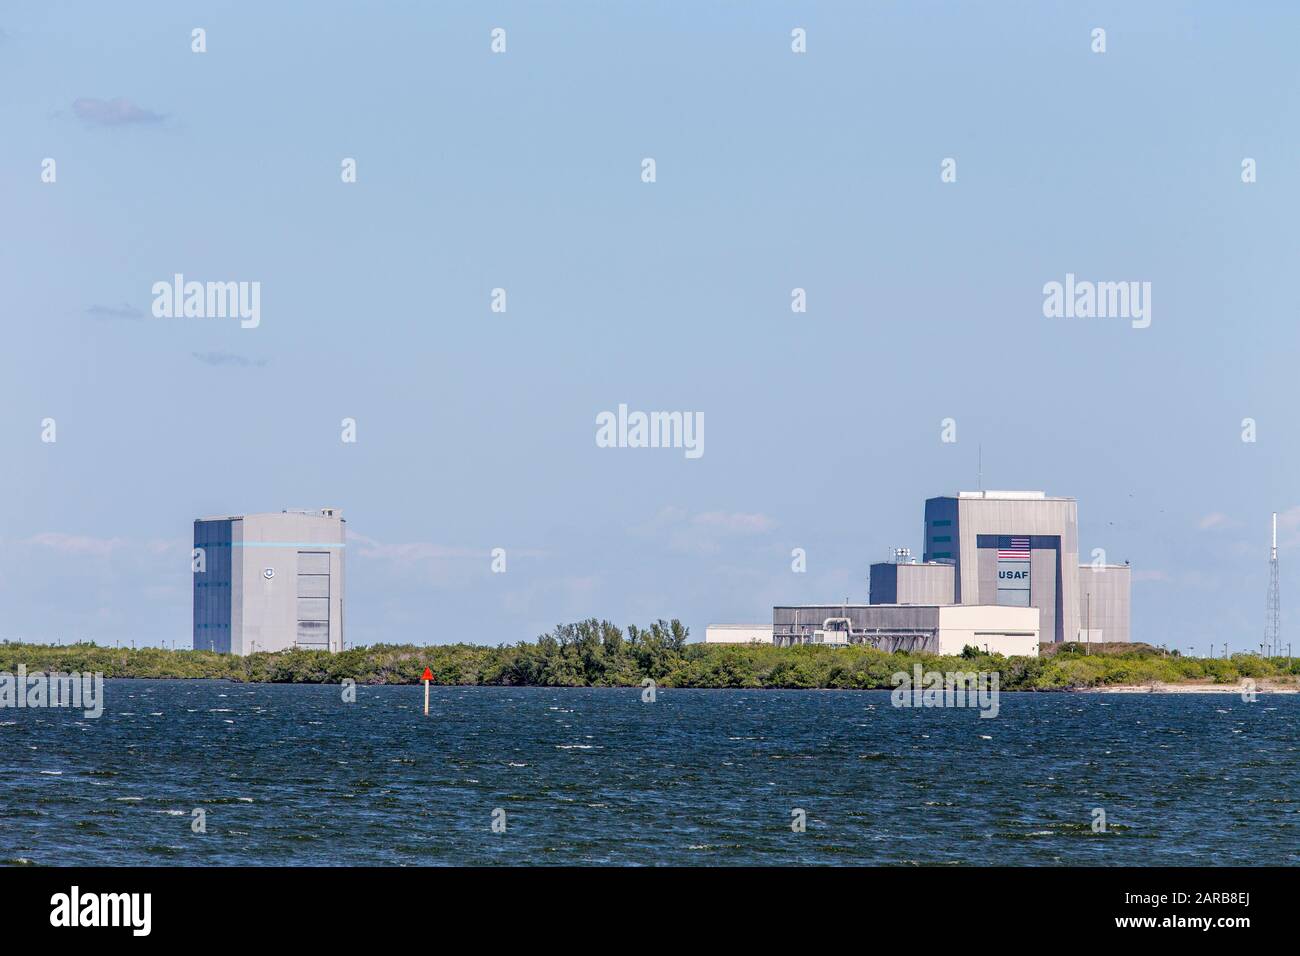 USAF United States Air Force Rocket and Space Craft Assembly Building at the John F Kennedy Space Center at Cape Canaveral, Florida Stock Photo